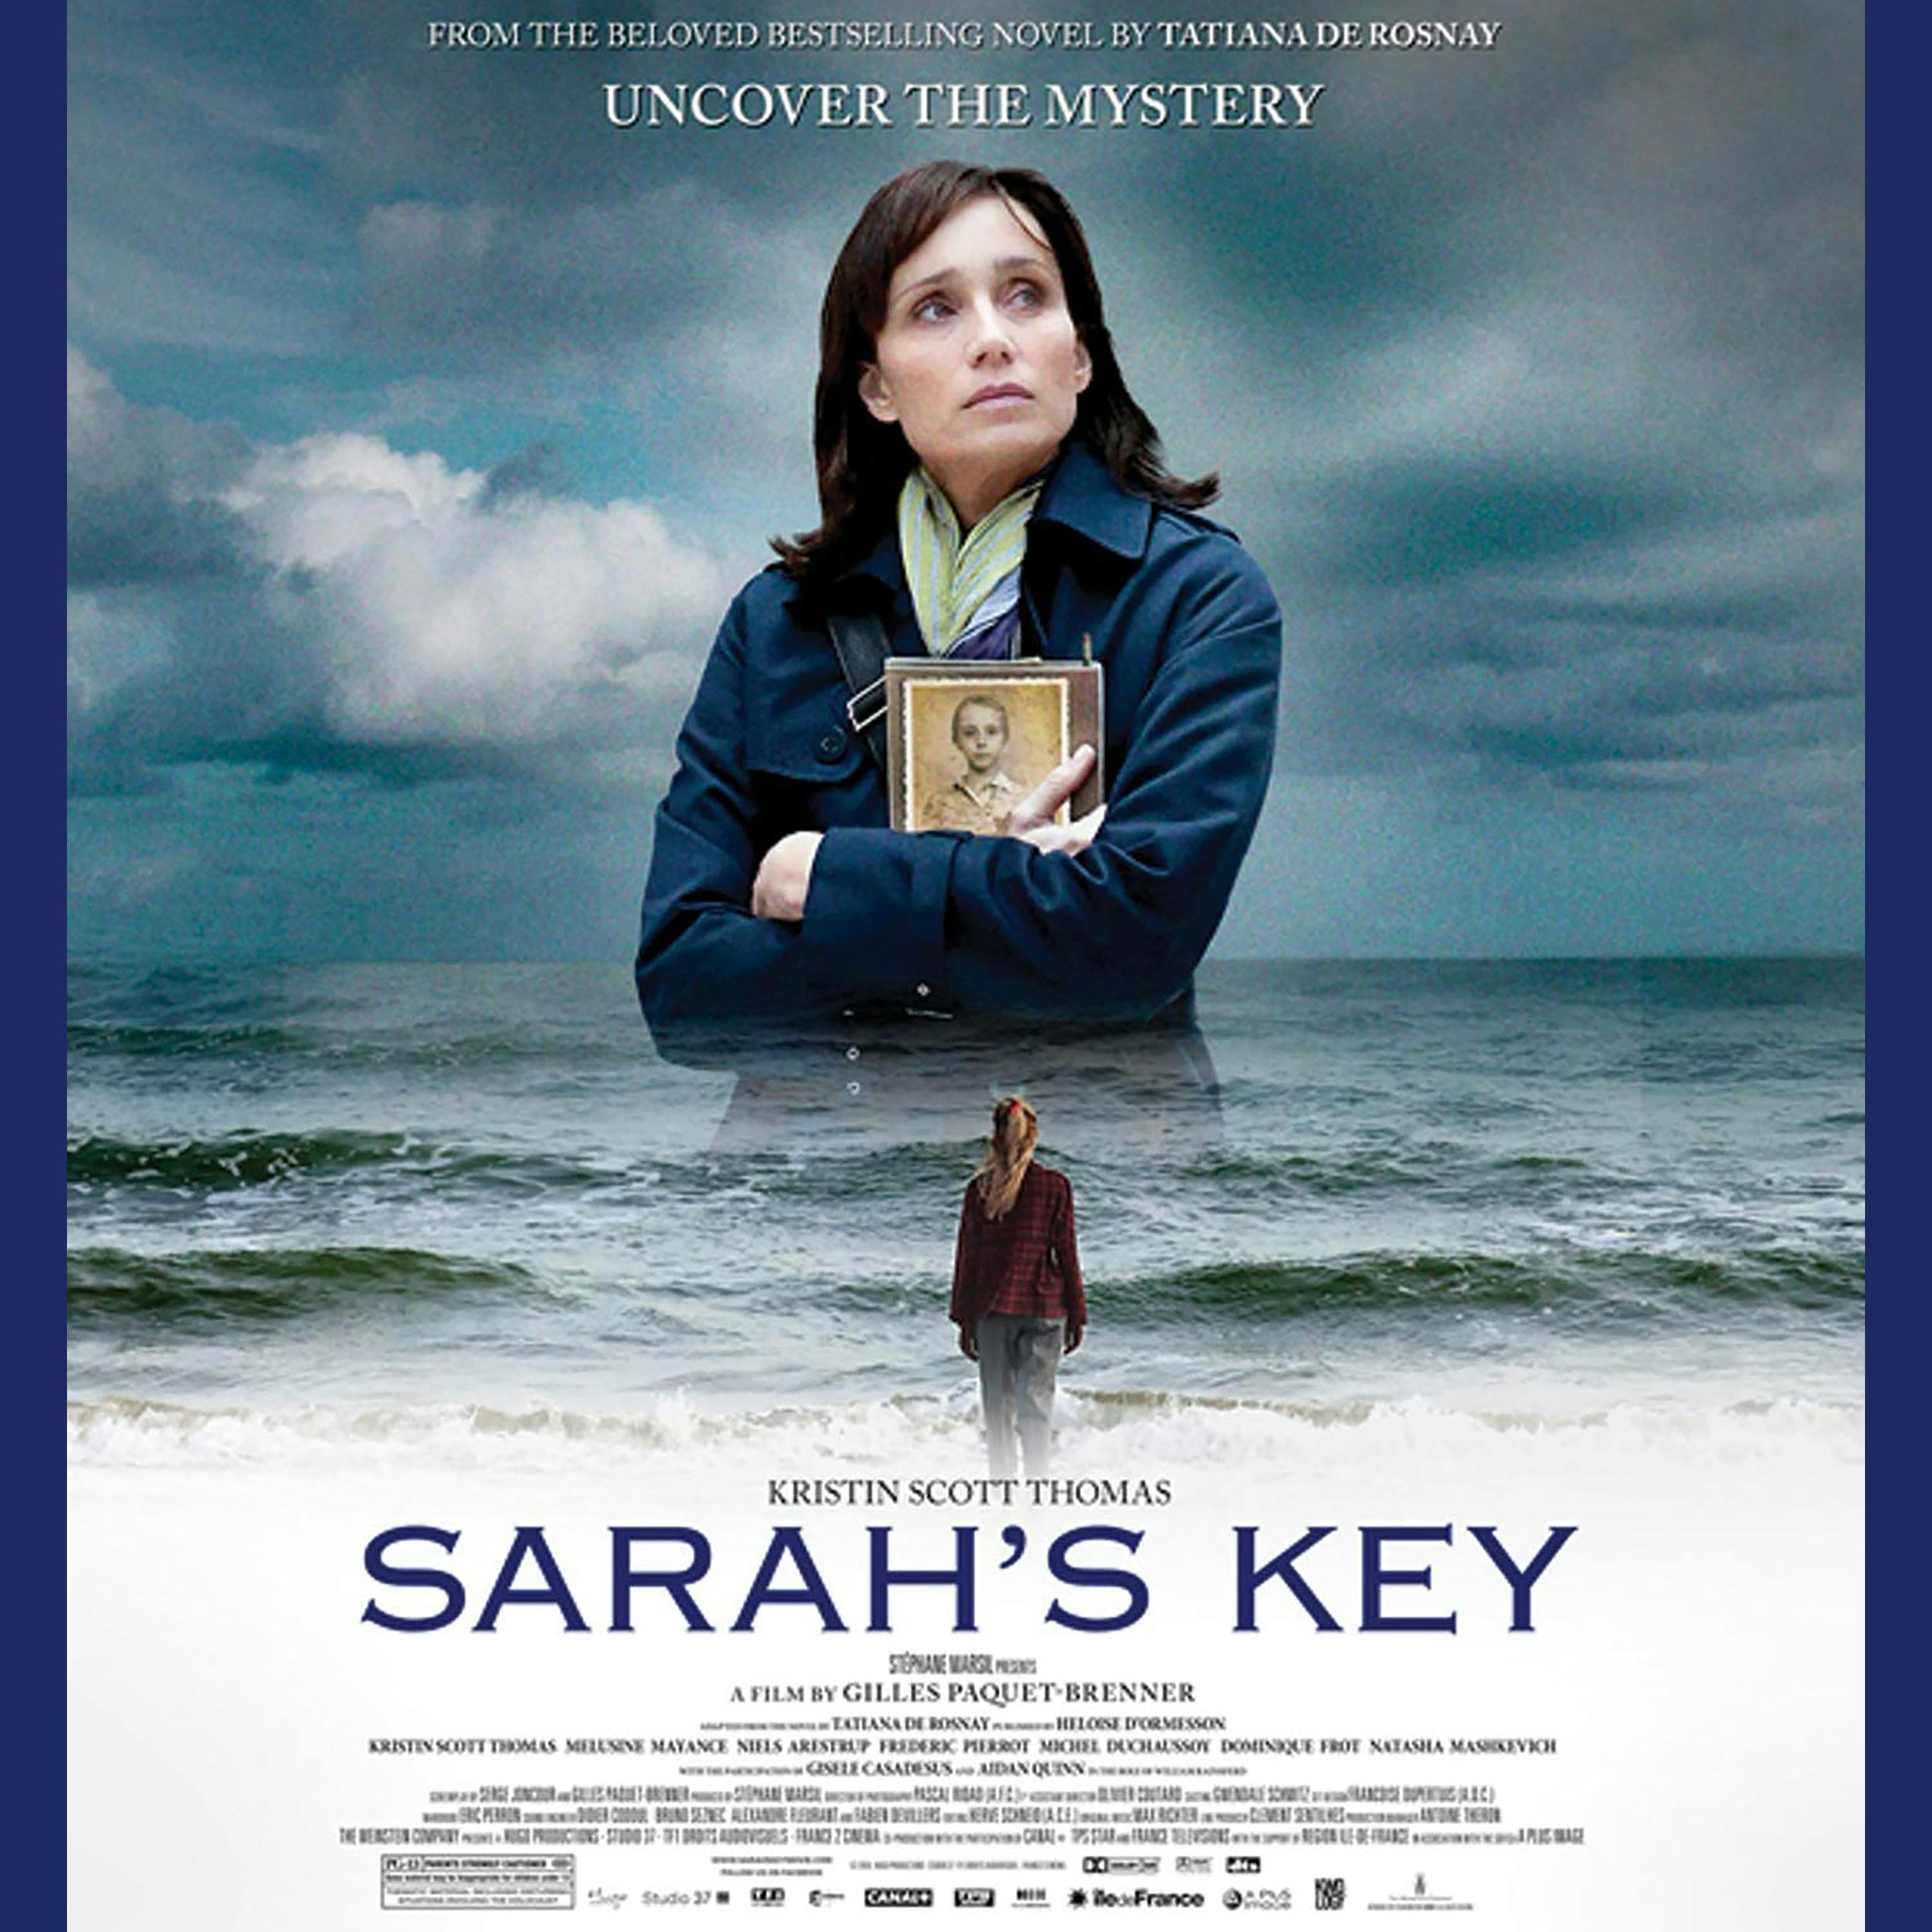 book review on sarah's key